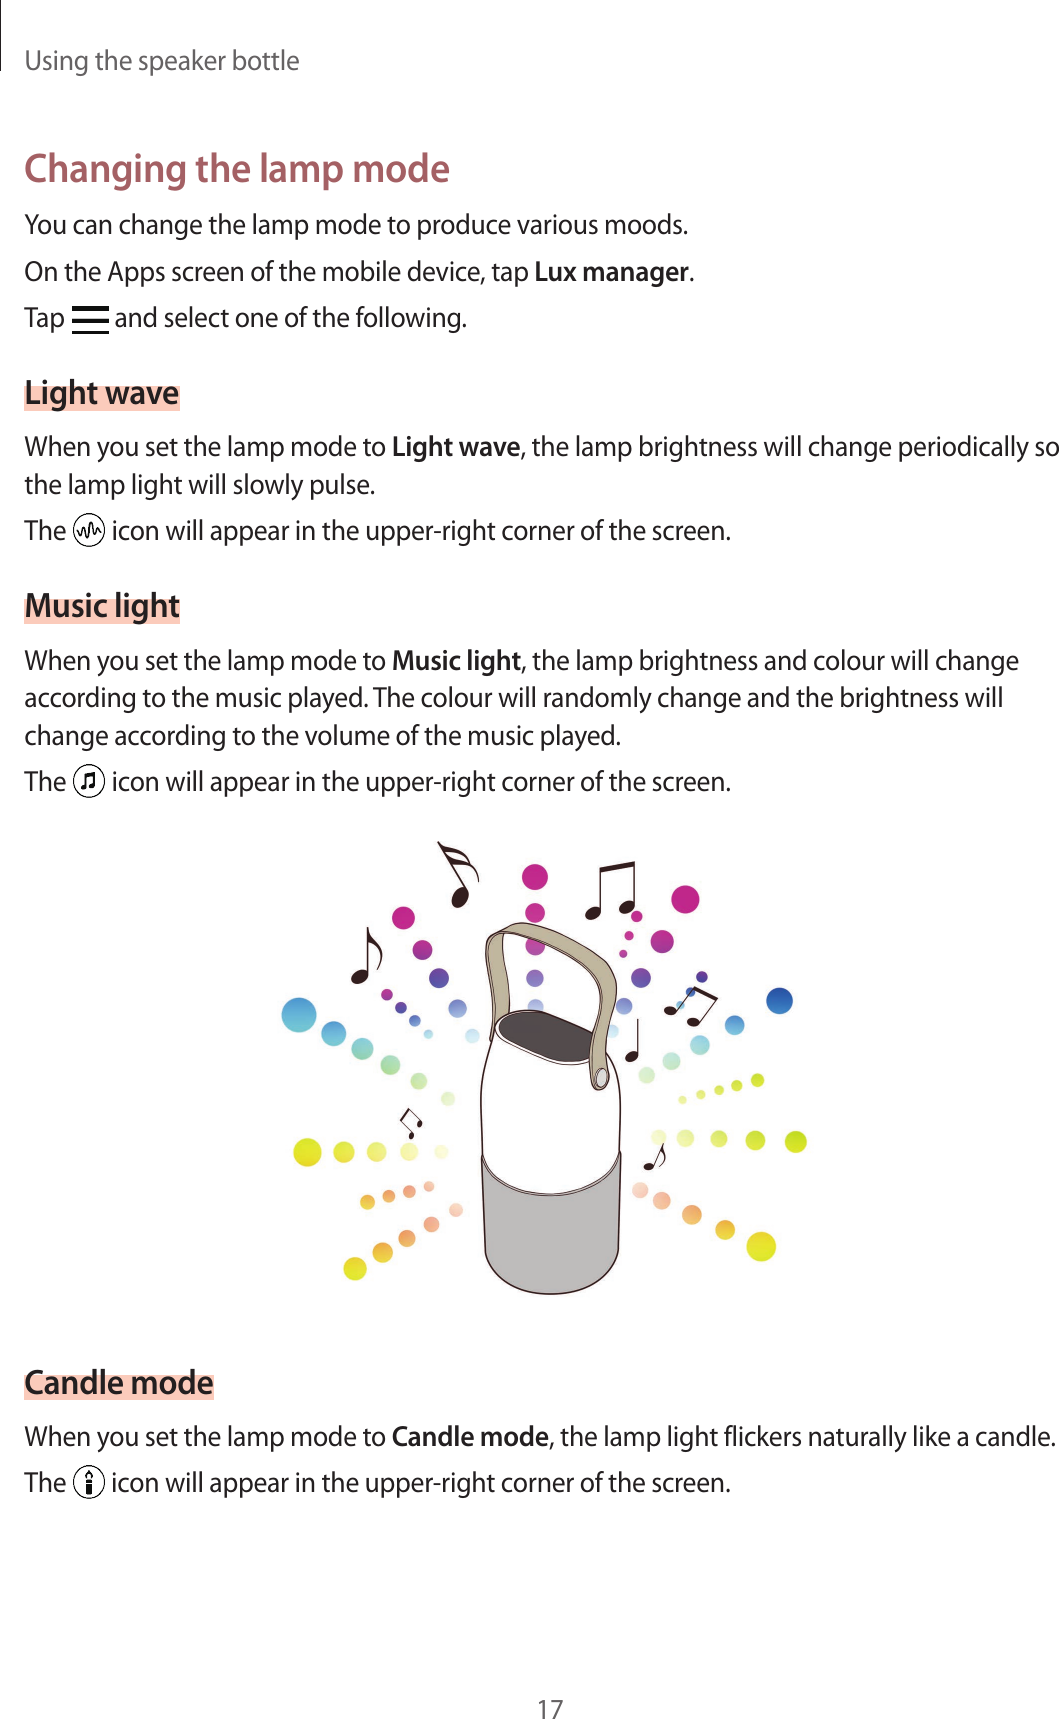 Using the speaker bottle17Changing the lamp modeYou can change the lamp mode to produce various moods.On the Apps screen of the mobile device, tap Lux manager.Tap   and select one of the following.Light waveWhen you set the lamp mode to Light wave, the lamp brightness will change periodically so the lamp light will slowly pulse.The   icon will appear in the upper-right corner of the screen.Music lightWhen you set the lamp mode to Music light, the lamp brightness and colour will change according to the music played. The colour will randomly change and the brightness will change according to the volume of the music played.The   icon will appear in the upper-right corner of the screen.Candle modeWhen you set the lamp mode to Candle mode, the lamp light flickers naturally like a candle.The   icon will appear in the upper-right corner of the screen.